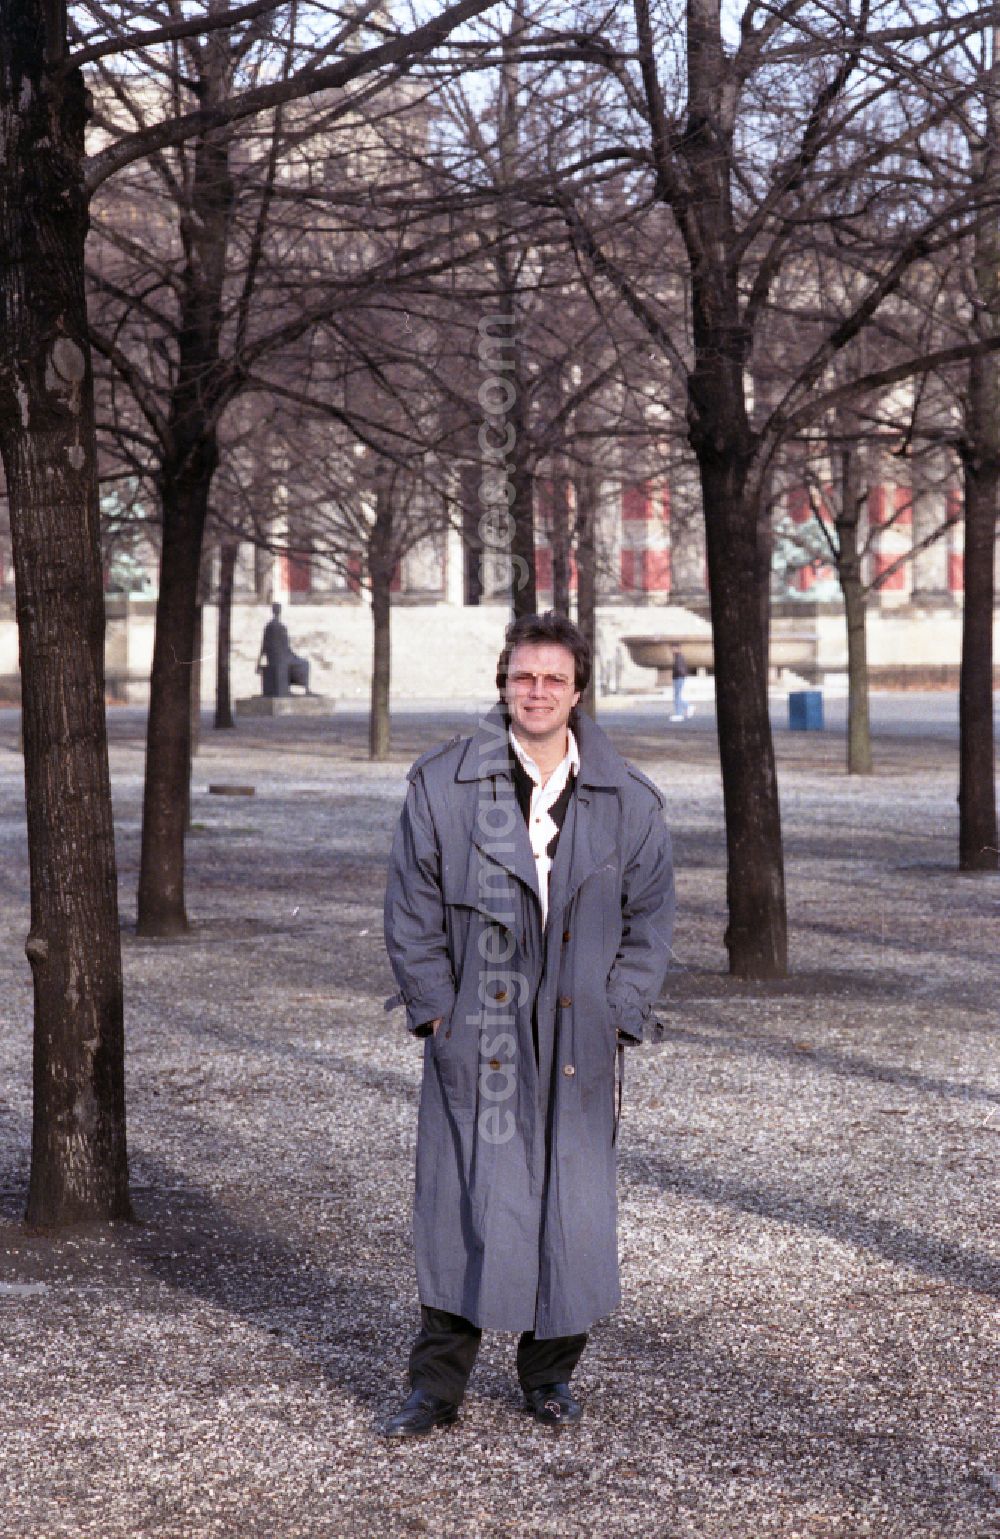 GDR image archive: Berlin - Portrait of the musician and moderator Wolfgang Lippert in the Lustgarten park in the Mitte district of Berlin East Berlin in the area of the former GDR, German Democratic Republic